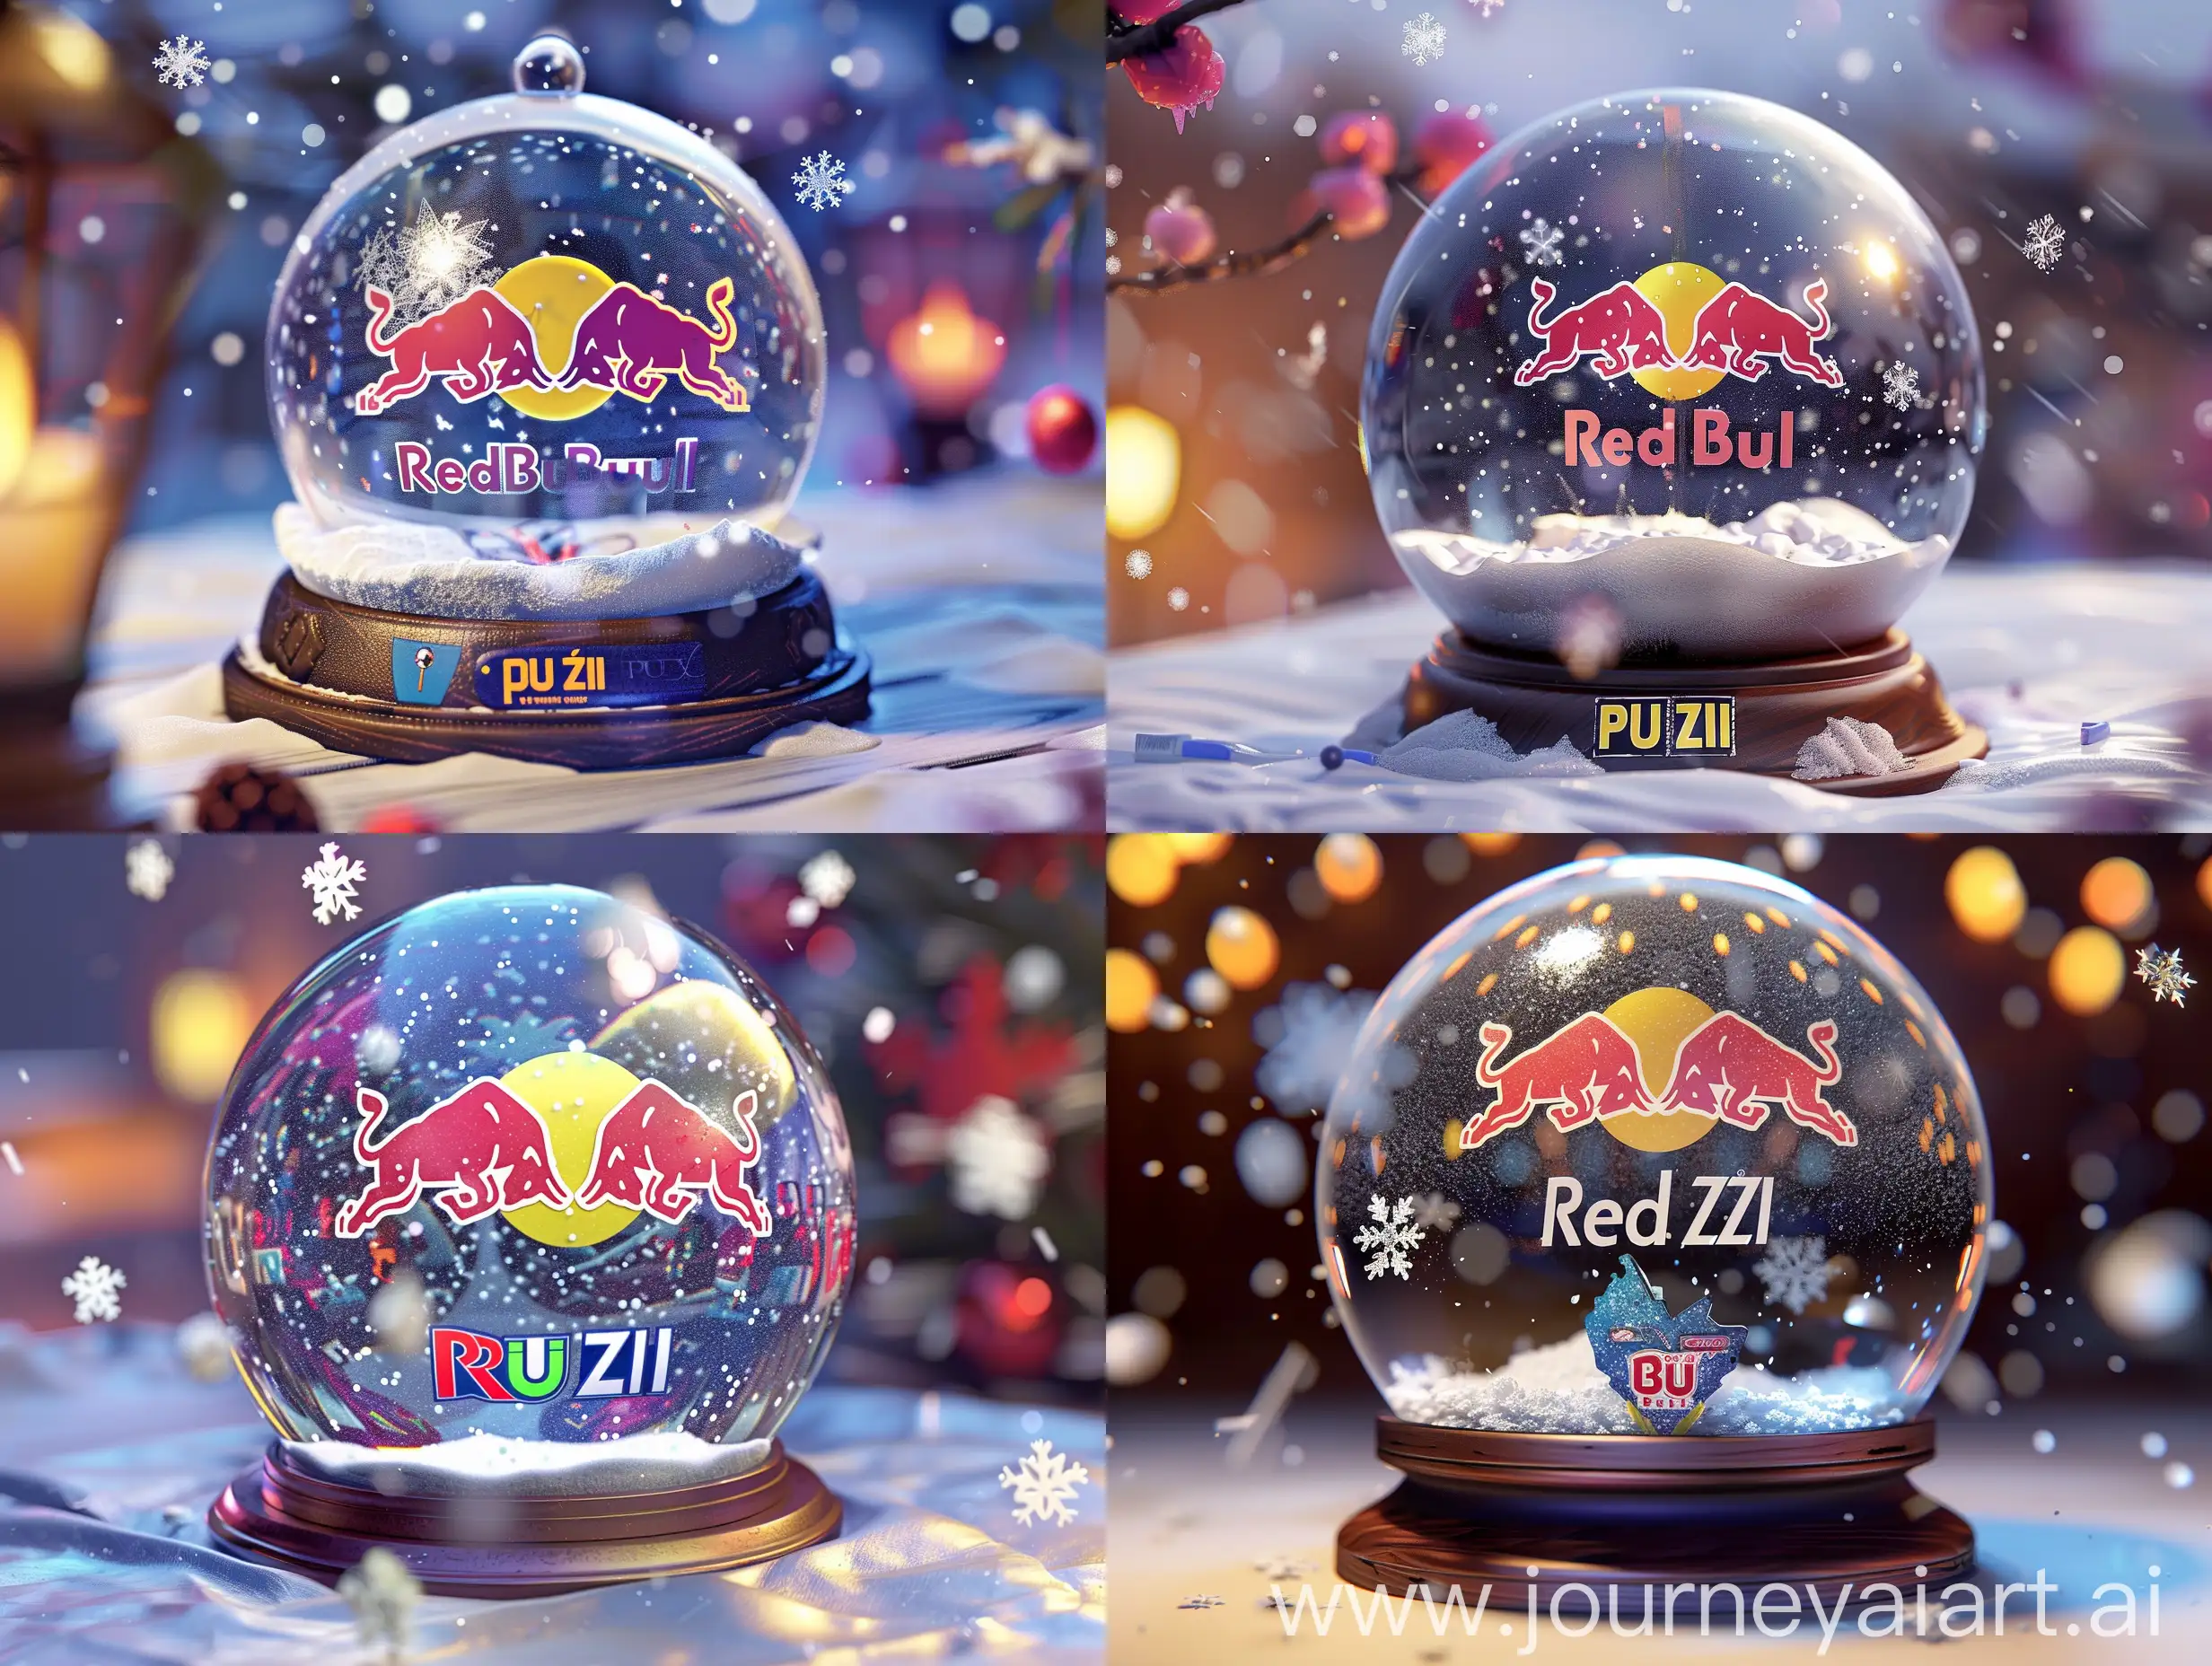 A mesmerizing 8K HD snow globe image featuring the "Red Bull Batalla" crest, brought to life in a delightful 3D illustration. Surroundi  ng the crest is a lively winter scene, complete with snowflakes gently floating down and a vibrant, eye-catching "PU ZI" logo on the base. The combination of photography, illustration, 3D renderings, and anime-inspired elements creates a vivid and immersive visual experience that truly captures the imagination., illustration, 3d render, cinematic, photo